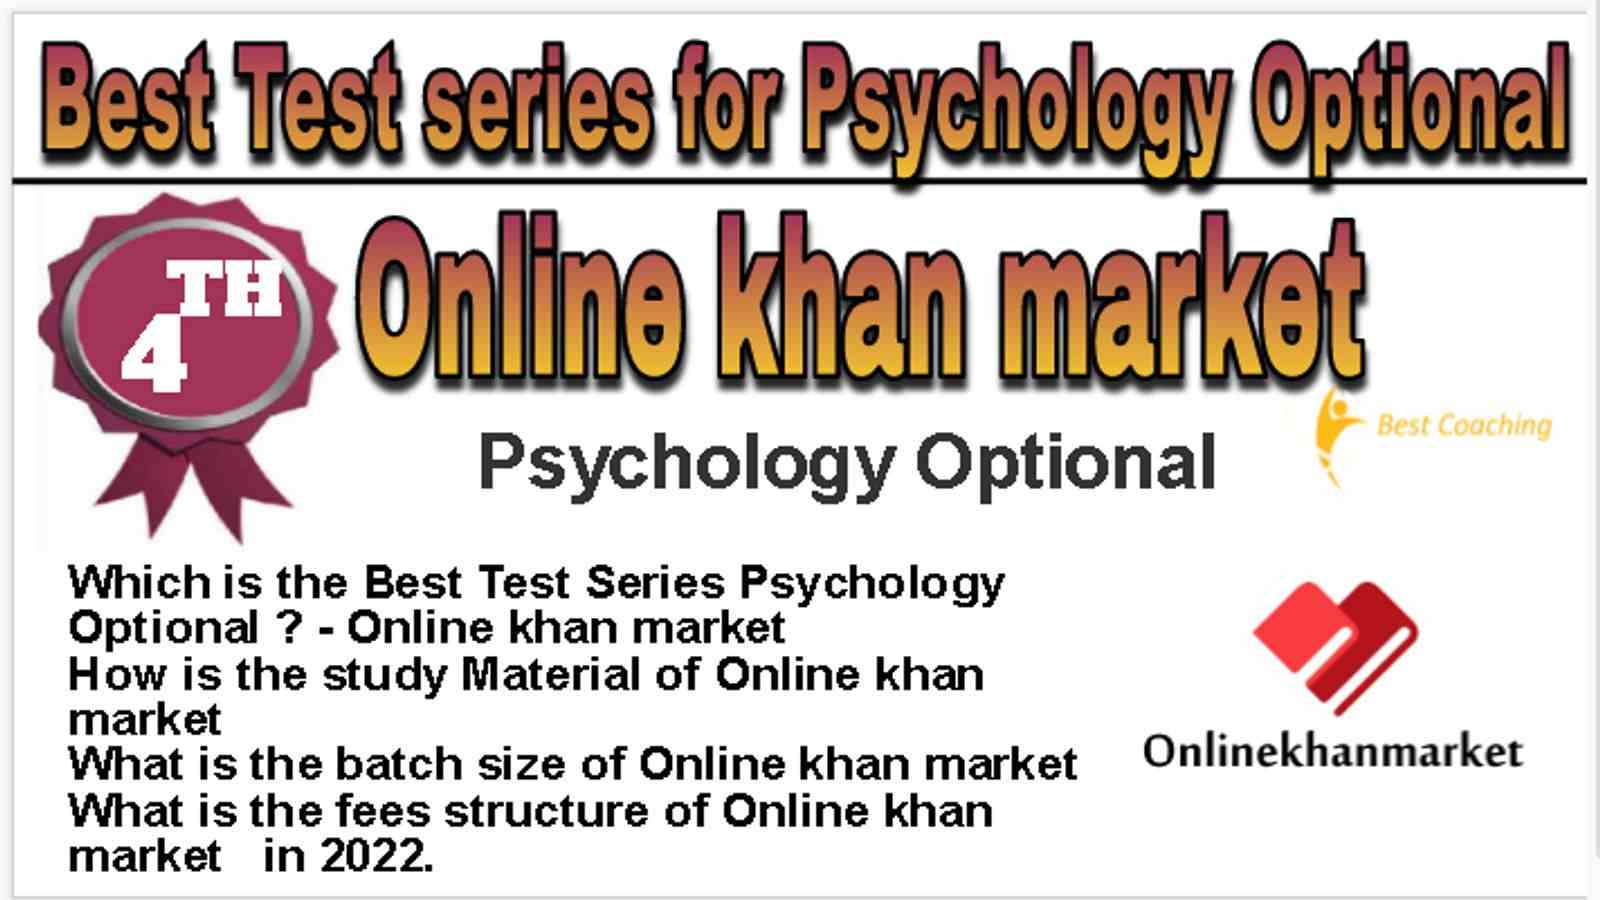 Rank 4 Best Test series for Psychology Optional